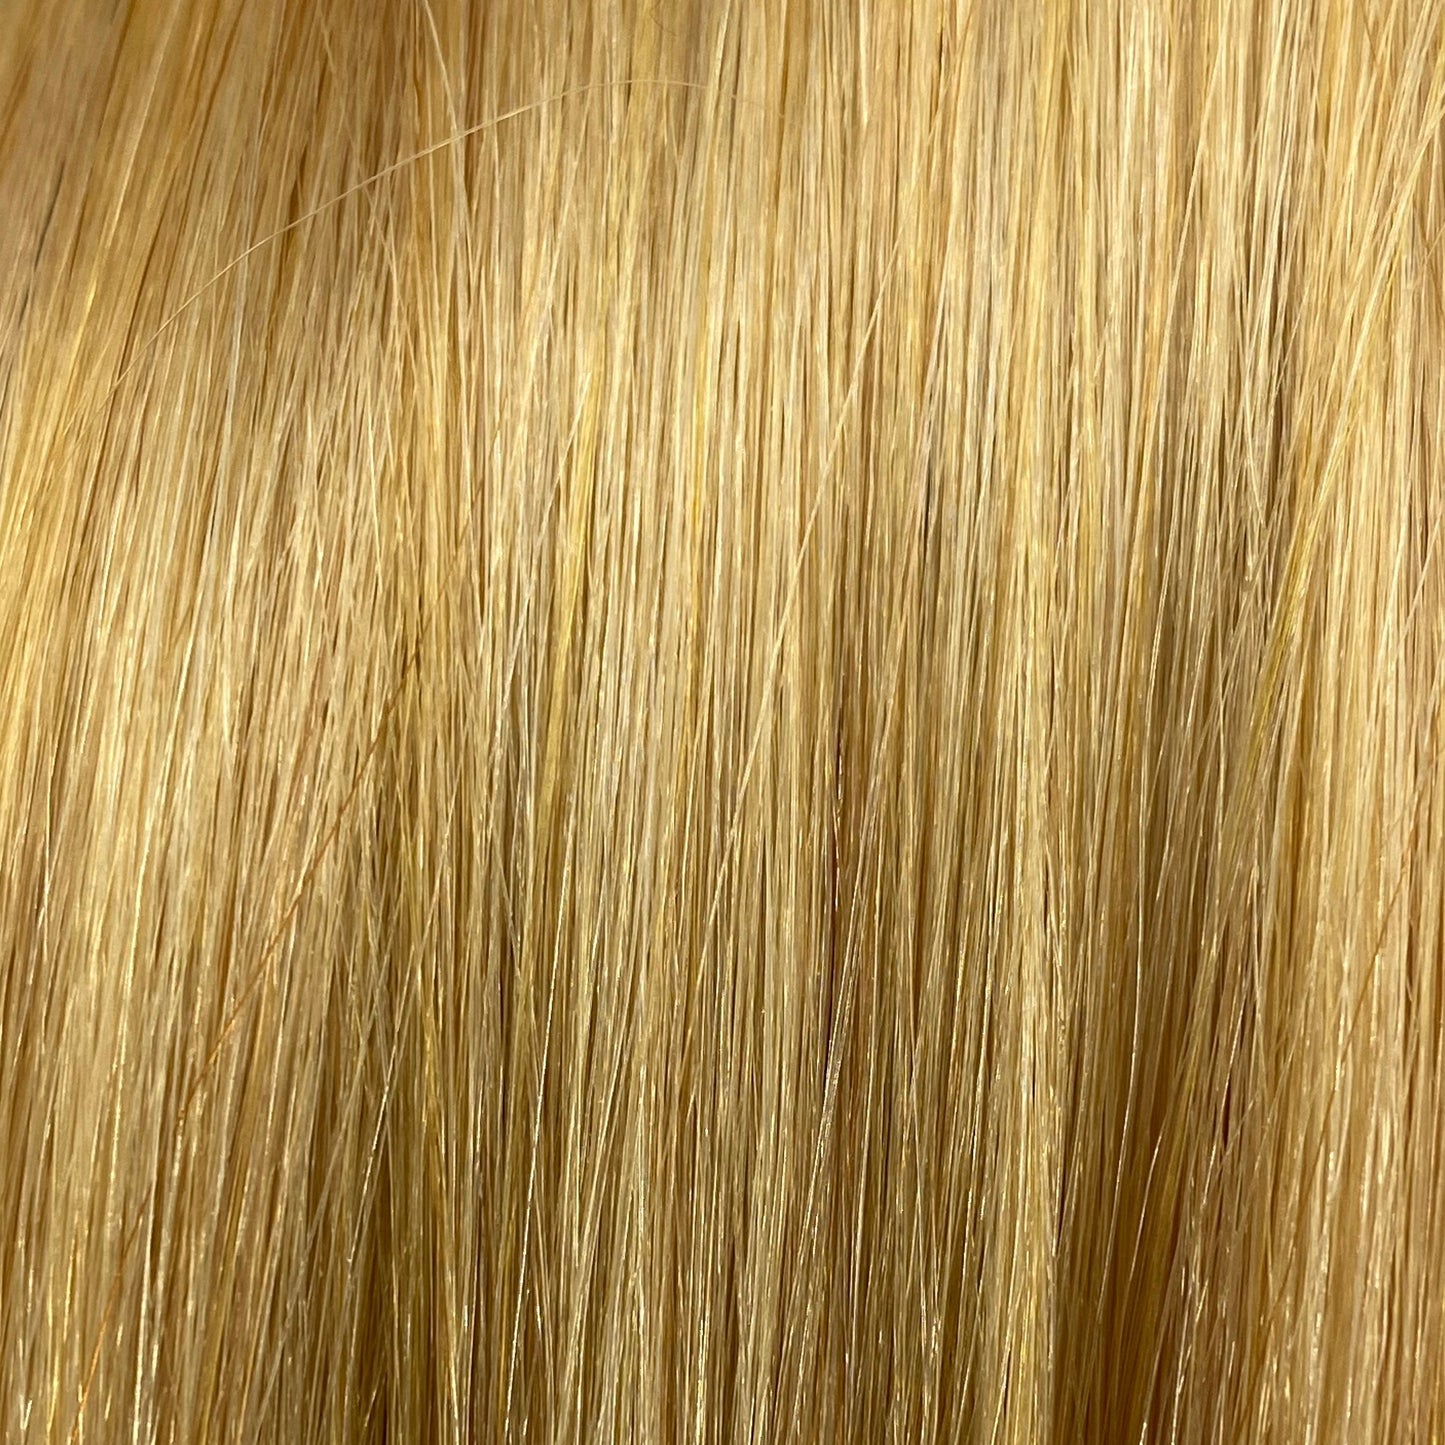 Fusion hair extensions #20 - 40cm/16 inches - Very Light Ultra Blonde Fusion Euro So Cap 